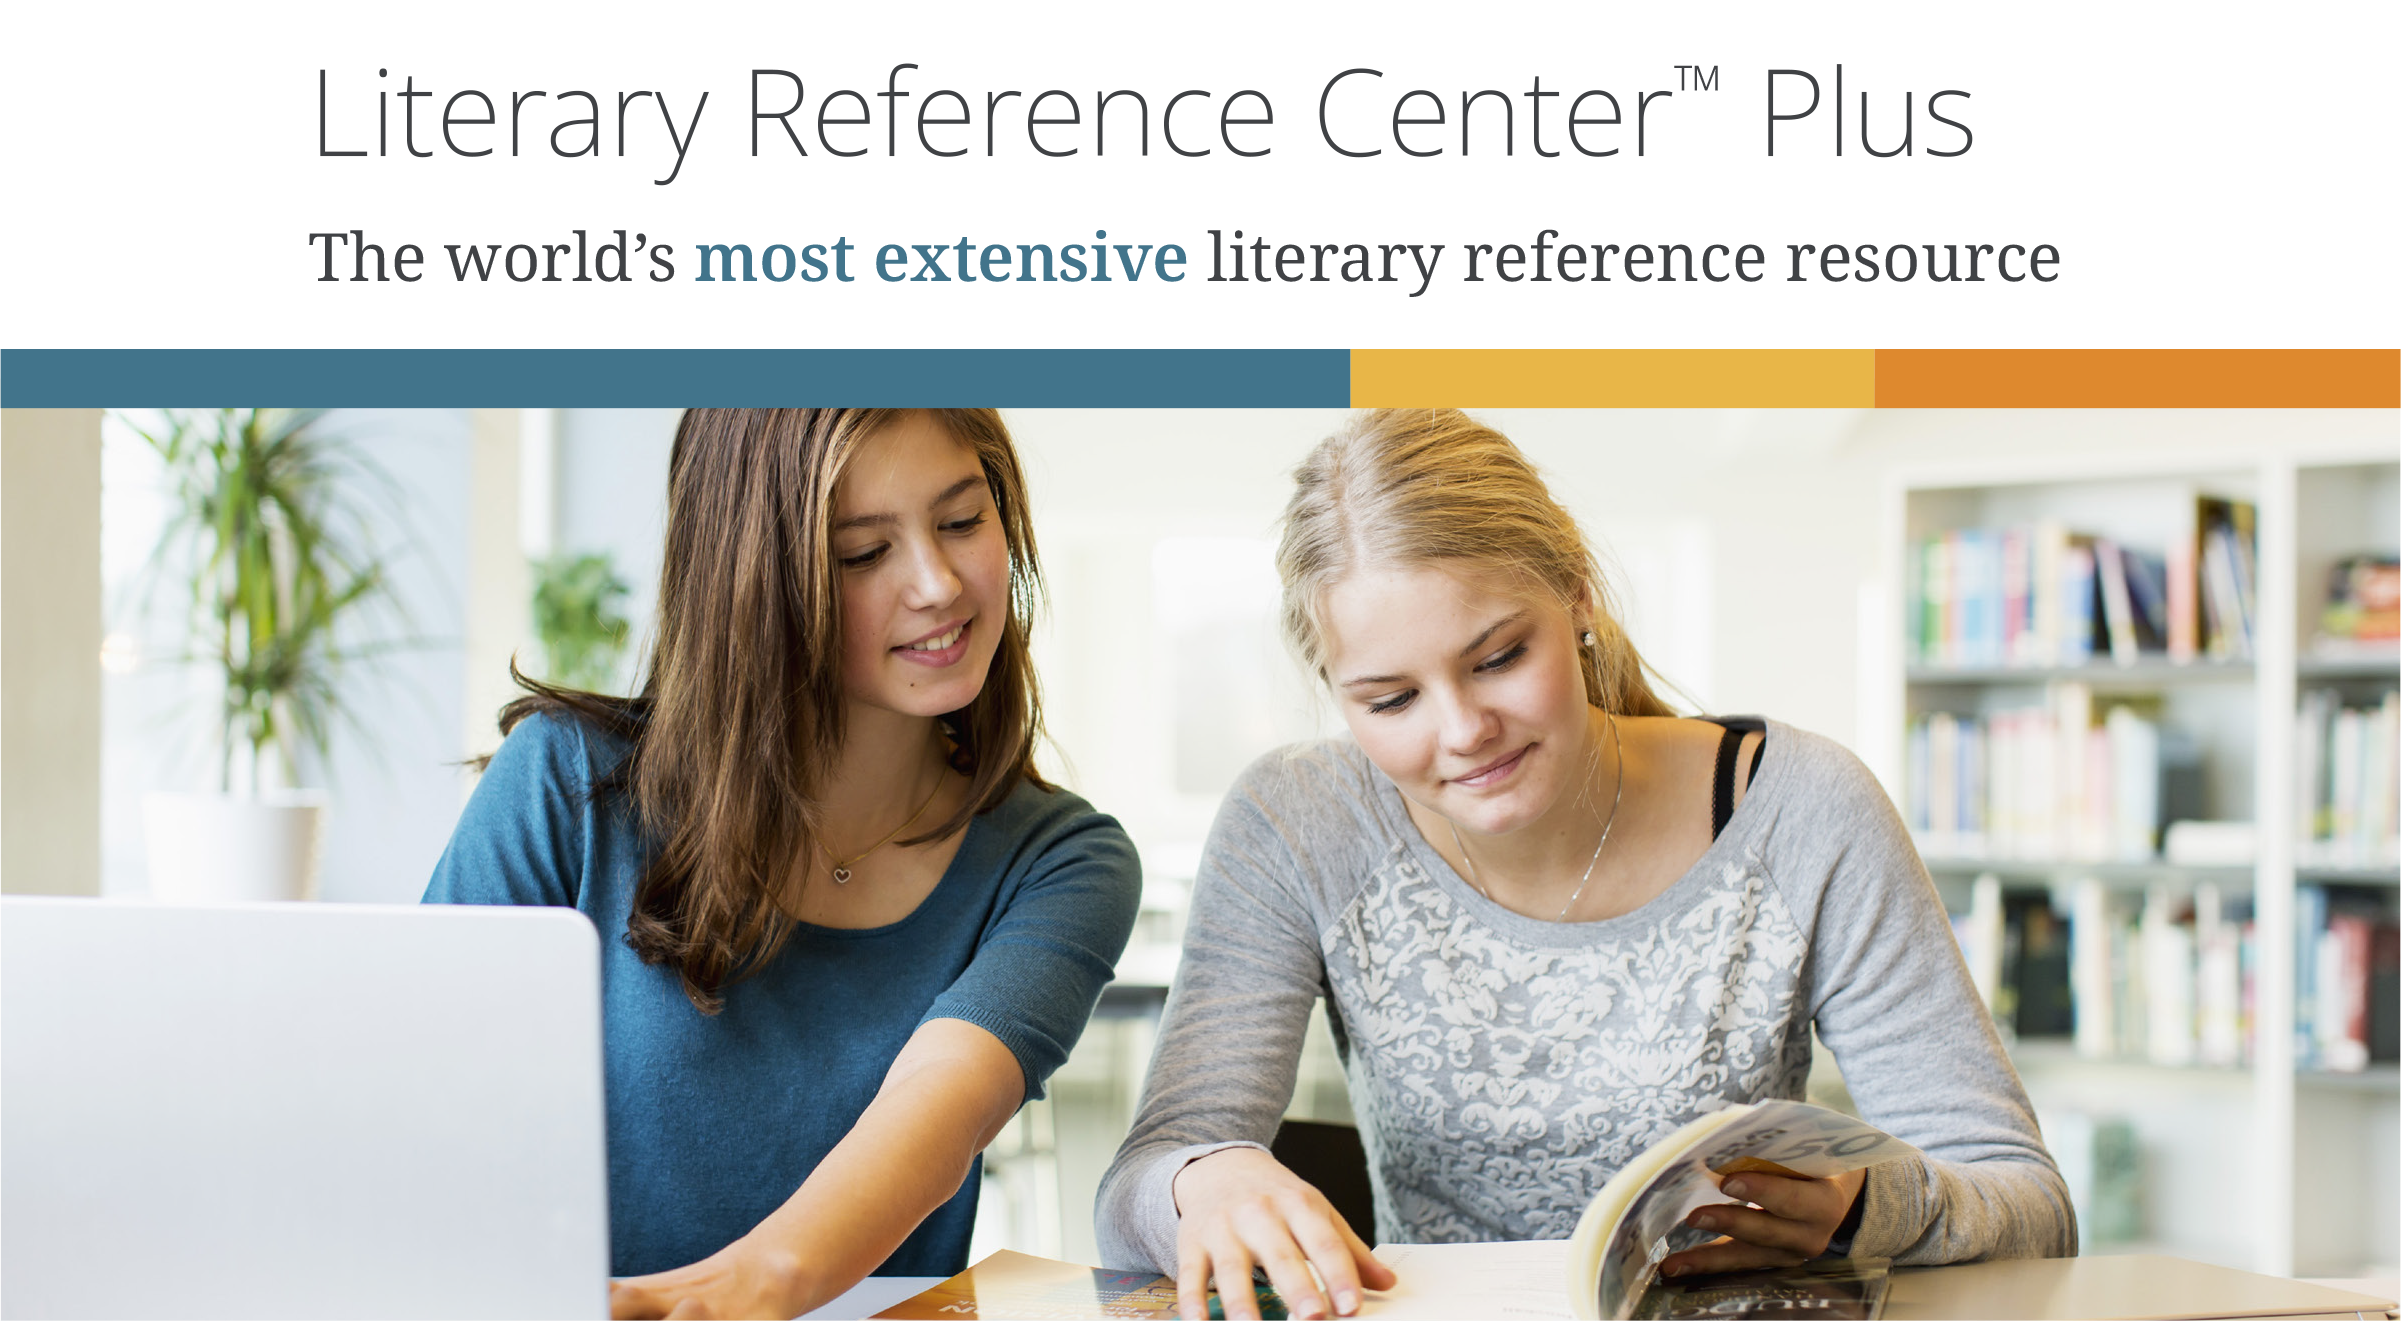 History Reference Center Plus